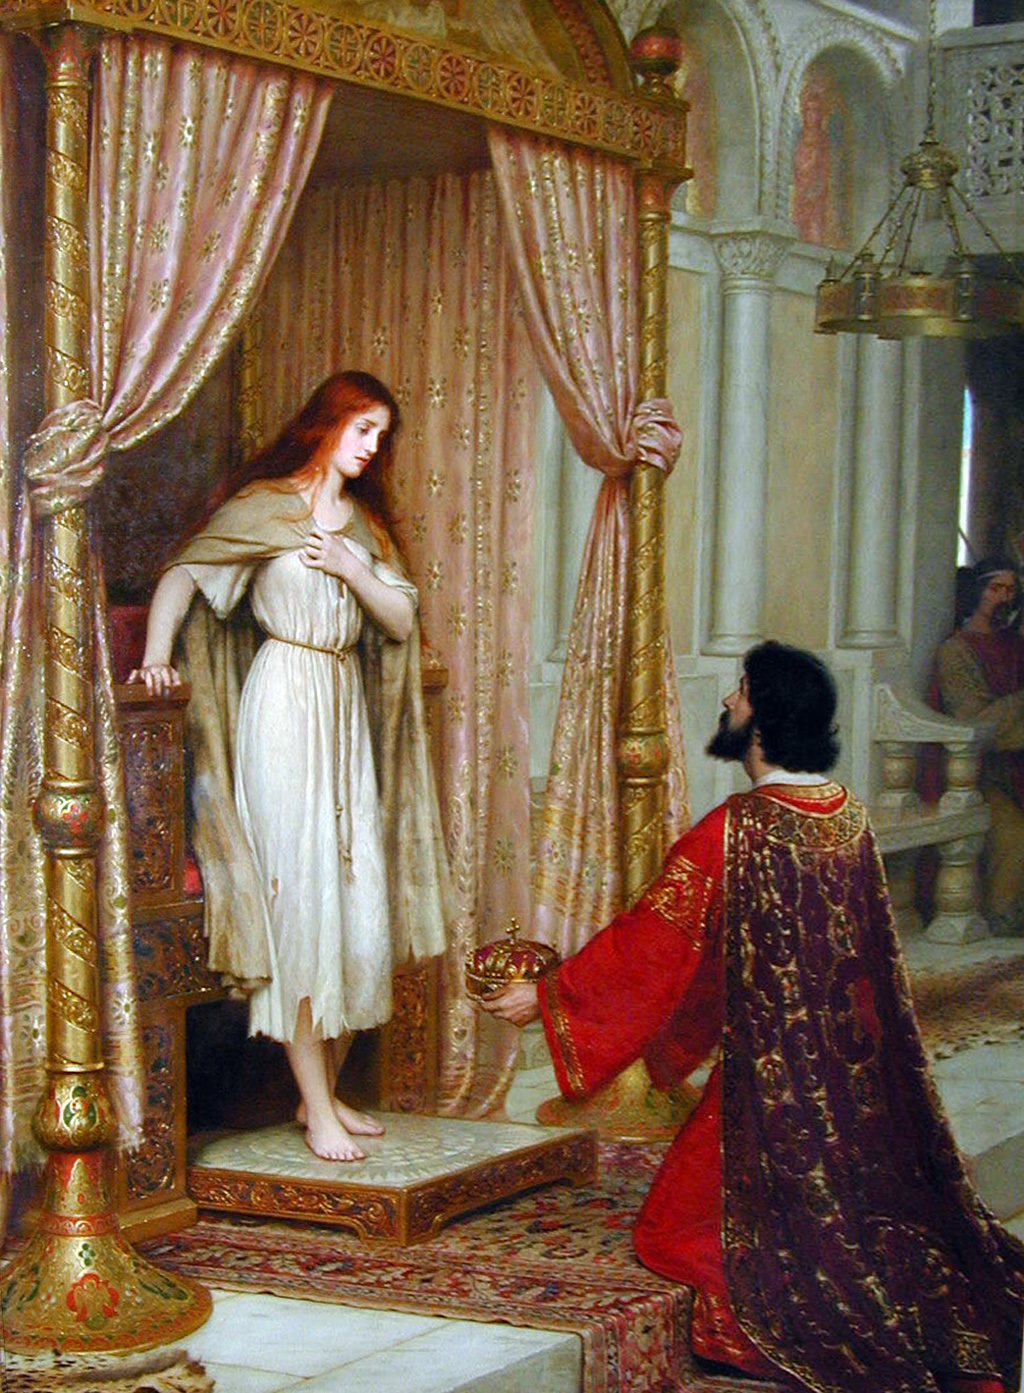 The King and the Beggar-maid by Edmund Blair Leighton